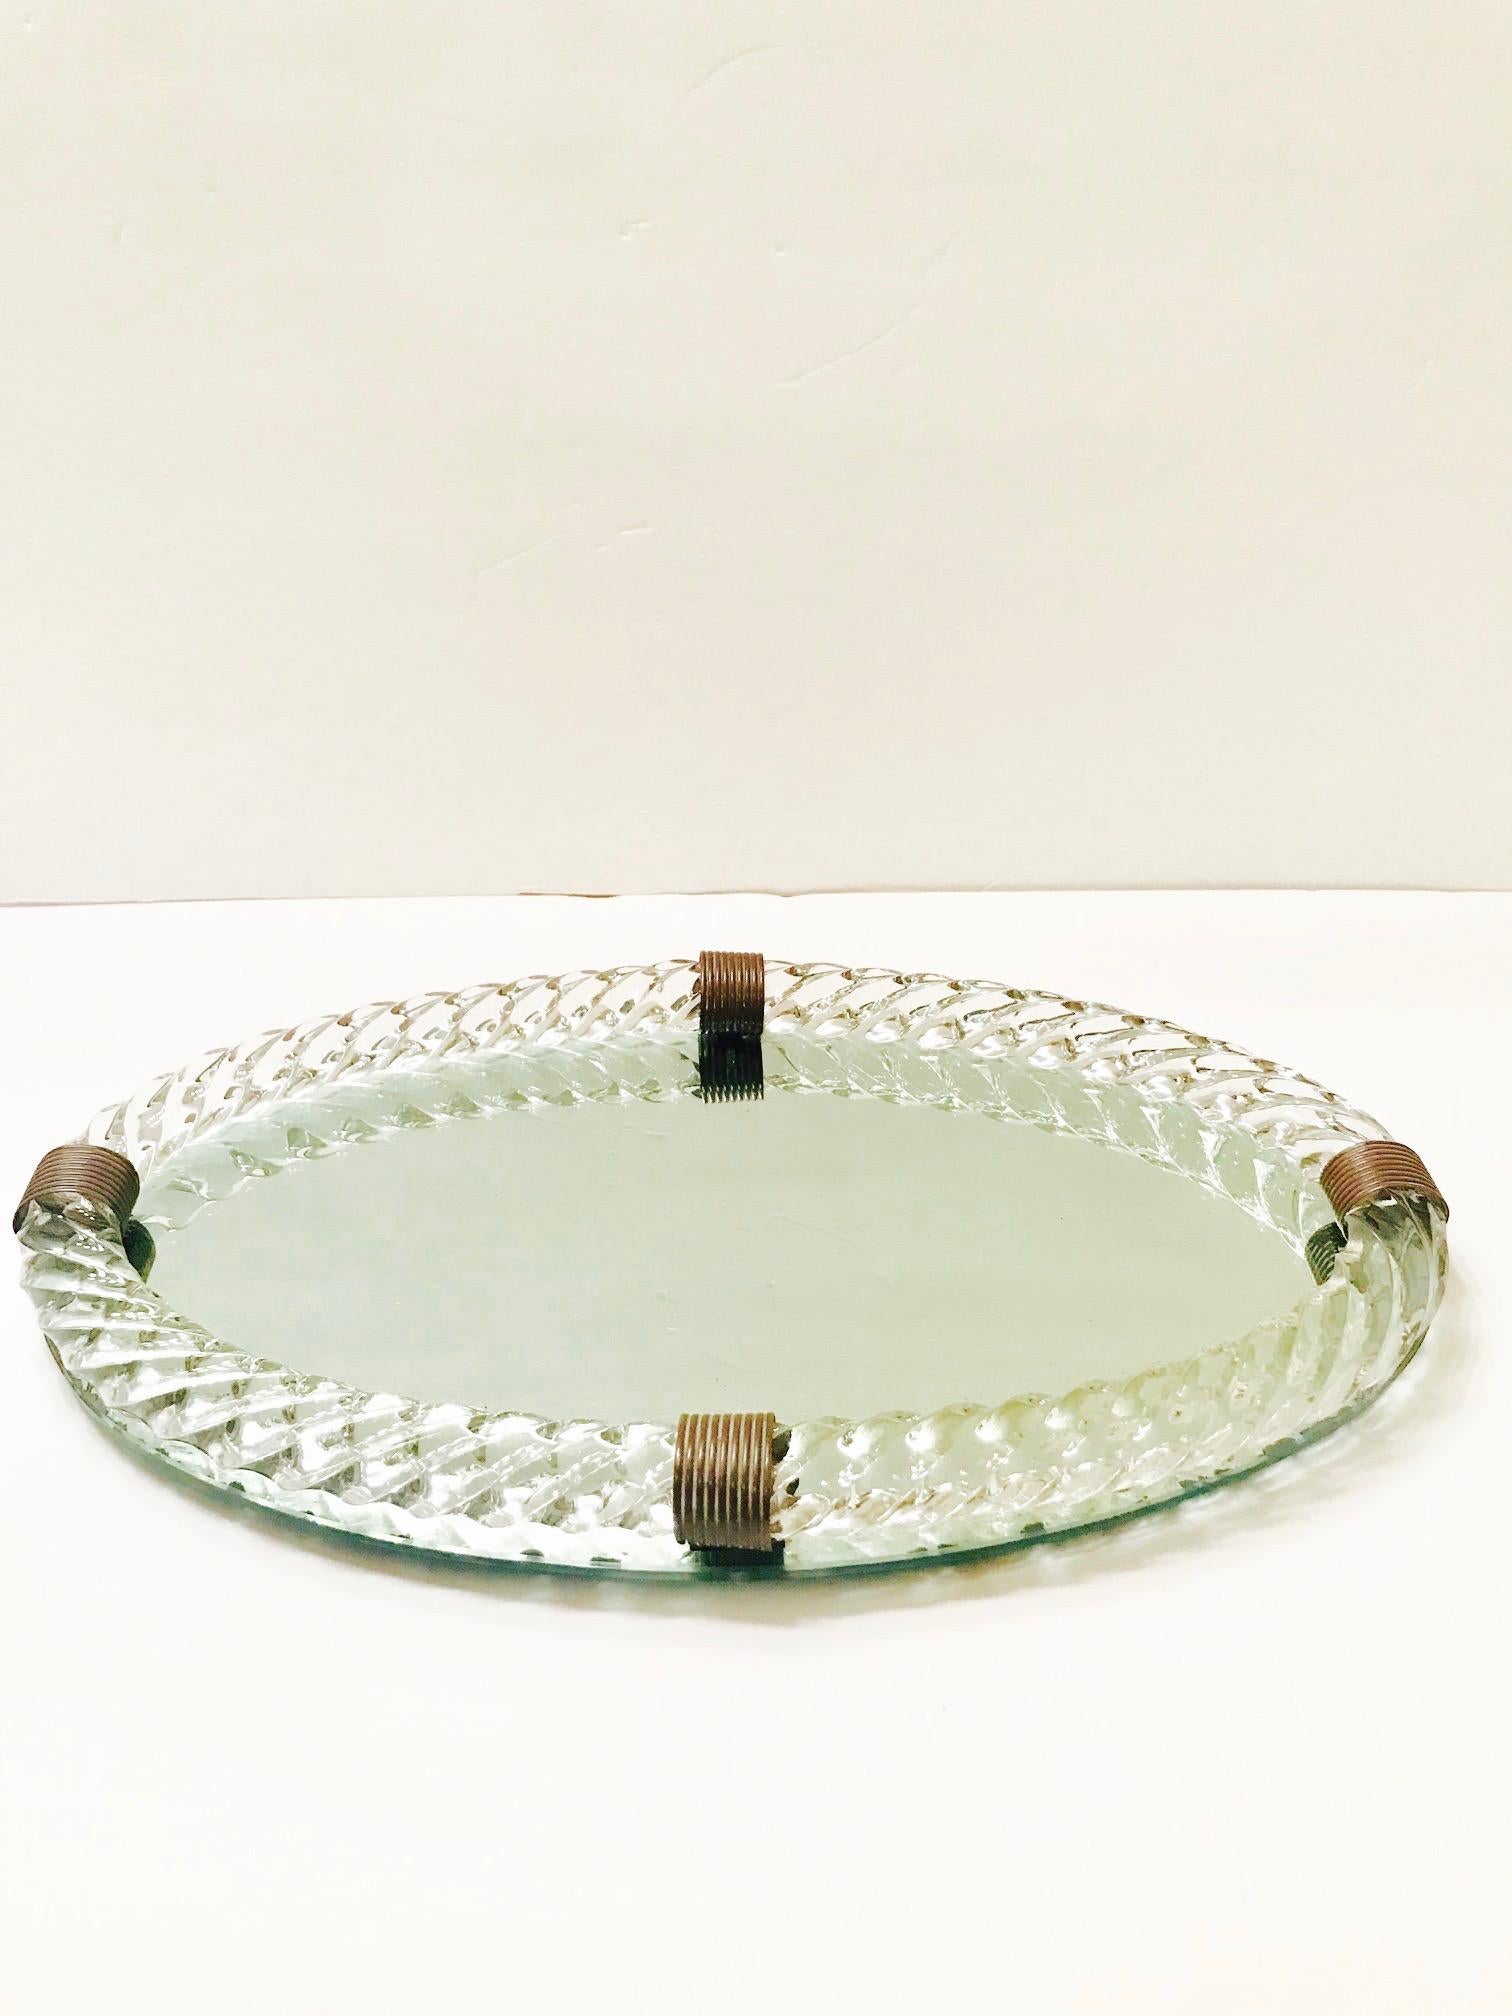 Exquisite Art Deco era mirrored tray with large hand blown Murano glass gallery in the form of twisted rope. The tray has an elegant oval form and features four bronzed metal fittings.